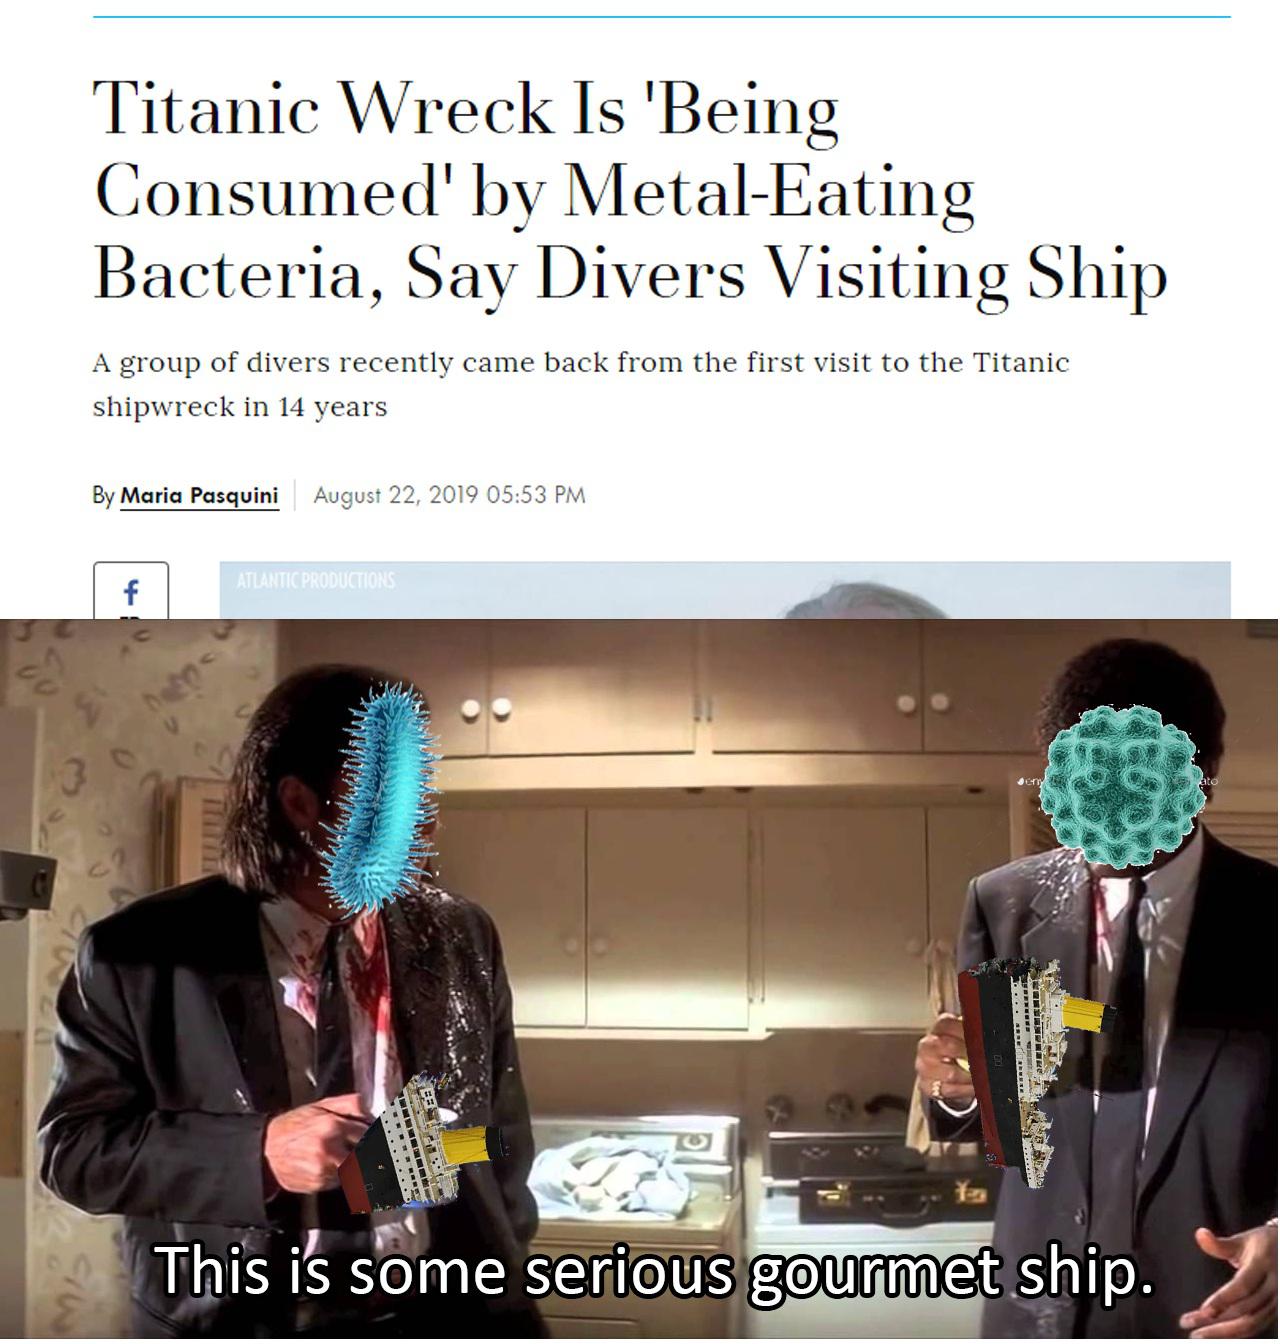 Dank Meme dank-memes cute text: Titanic Wreck Is 'Being Consumed' by Metal-Eating Bacteria, Say Divers Visiting Ship A group of divers recently came back from the first visit to the Titanic shipwreck in 14 years By Maria Pasquini August 22, 2019 05:53 PM This is some 